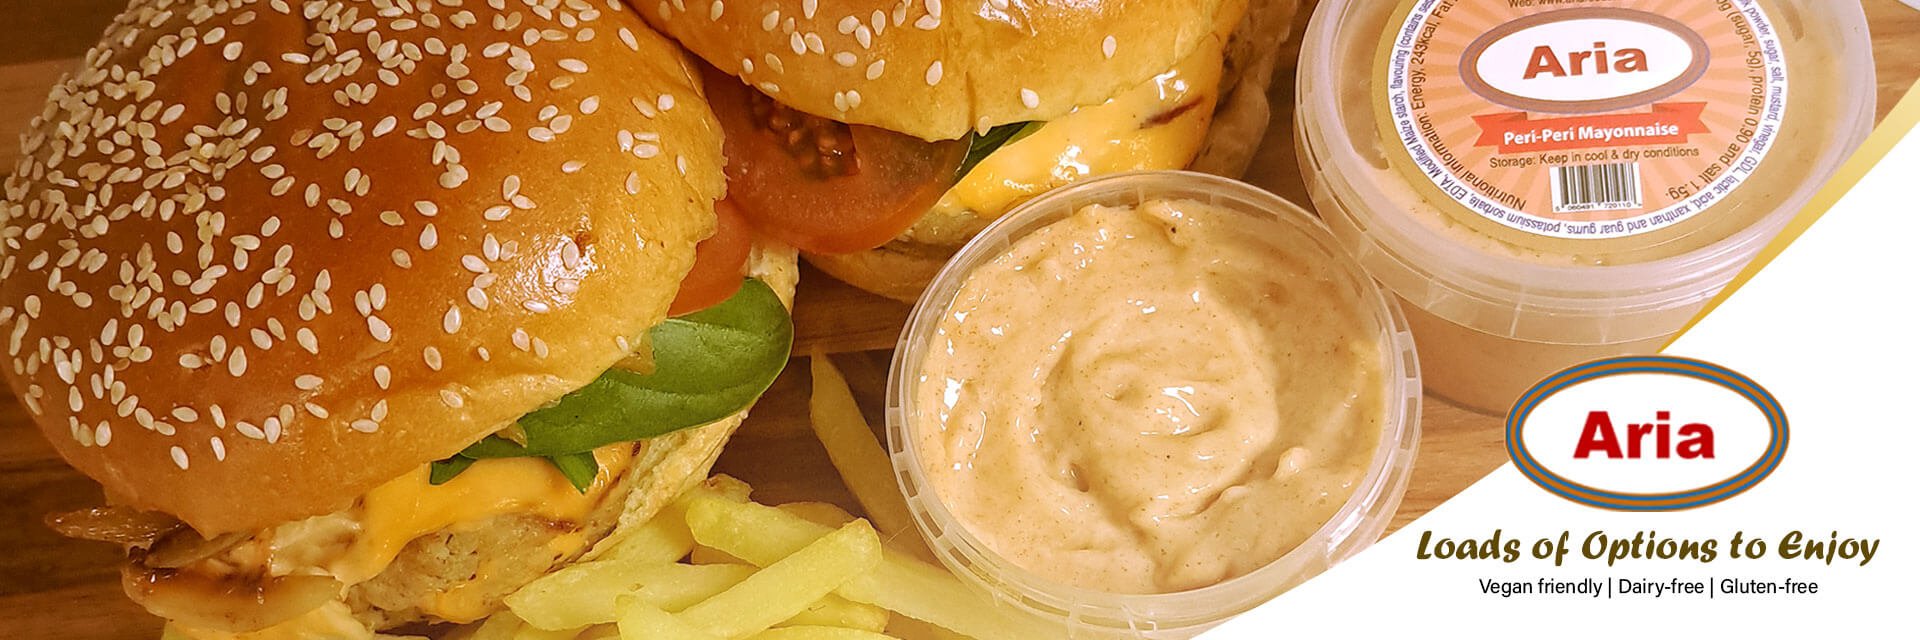 The Perks of Peri Peri Mayo: Spice Up Your Life with Aria